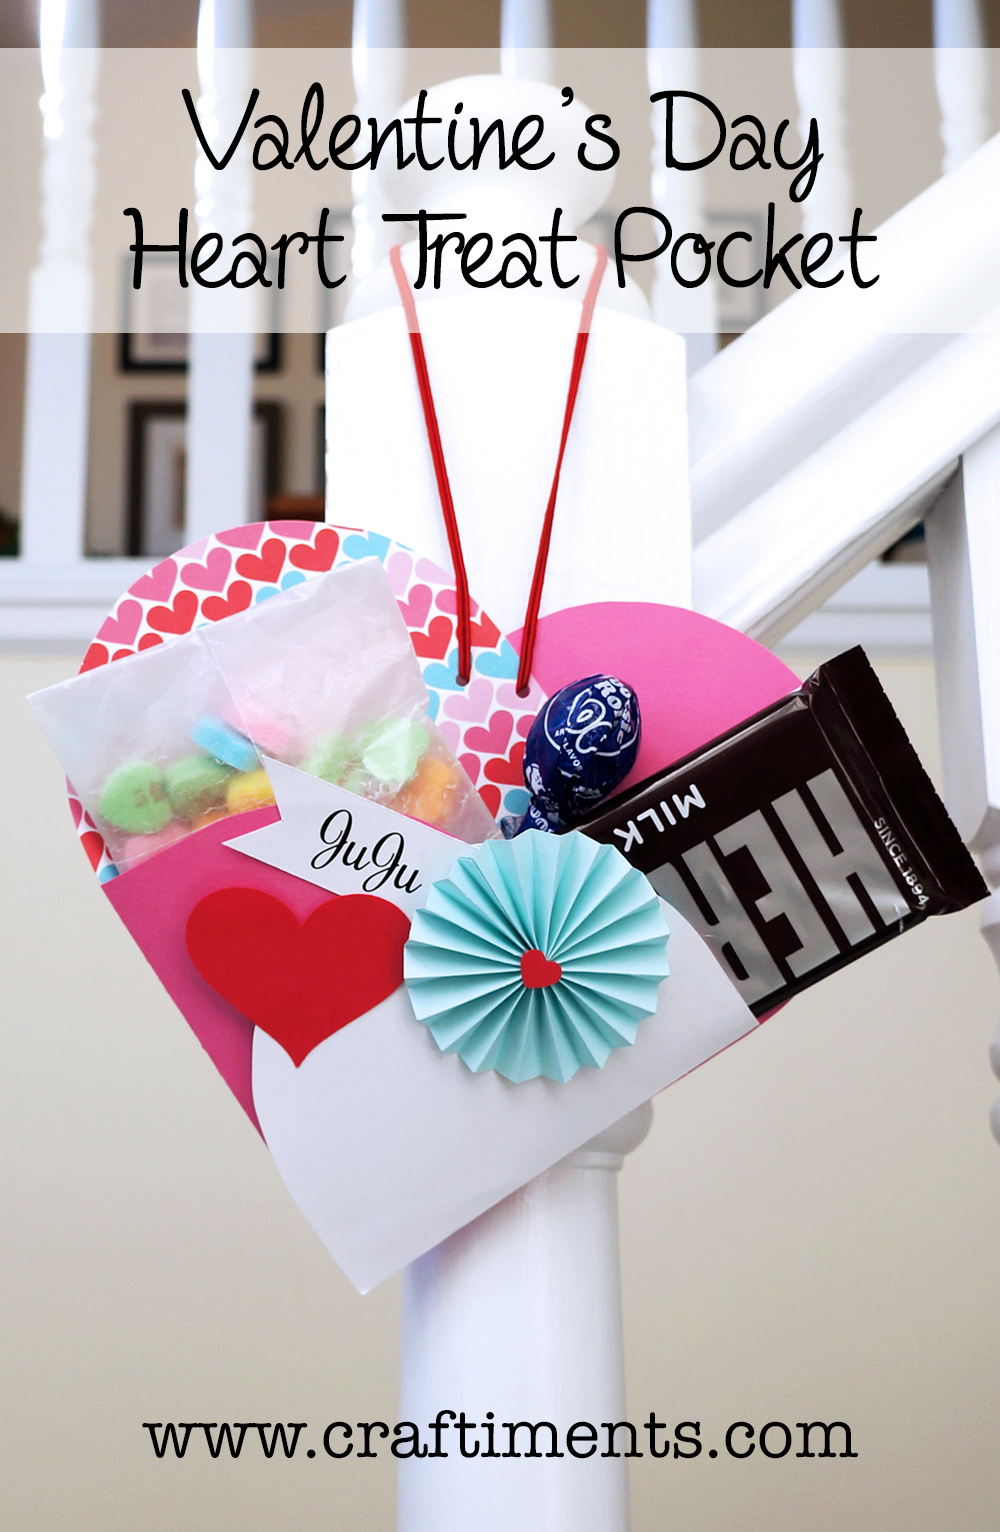 Valentine's Day Heart Shaped Treat Pocket Tutorial by Craftiments